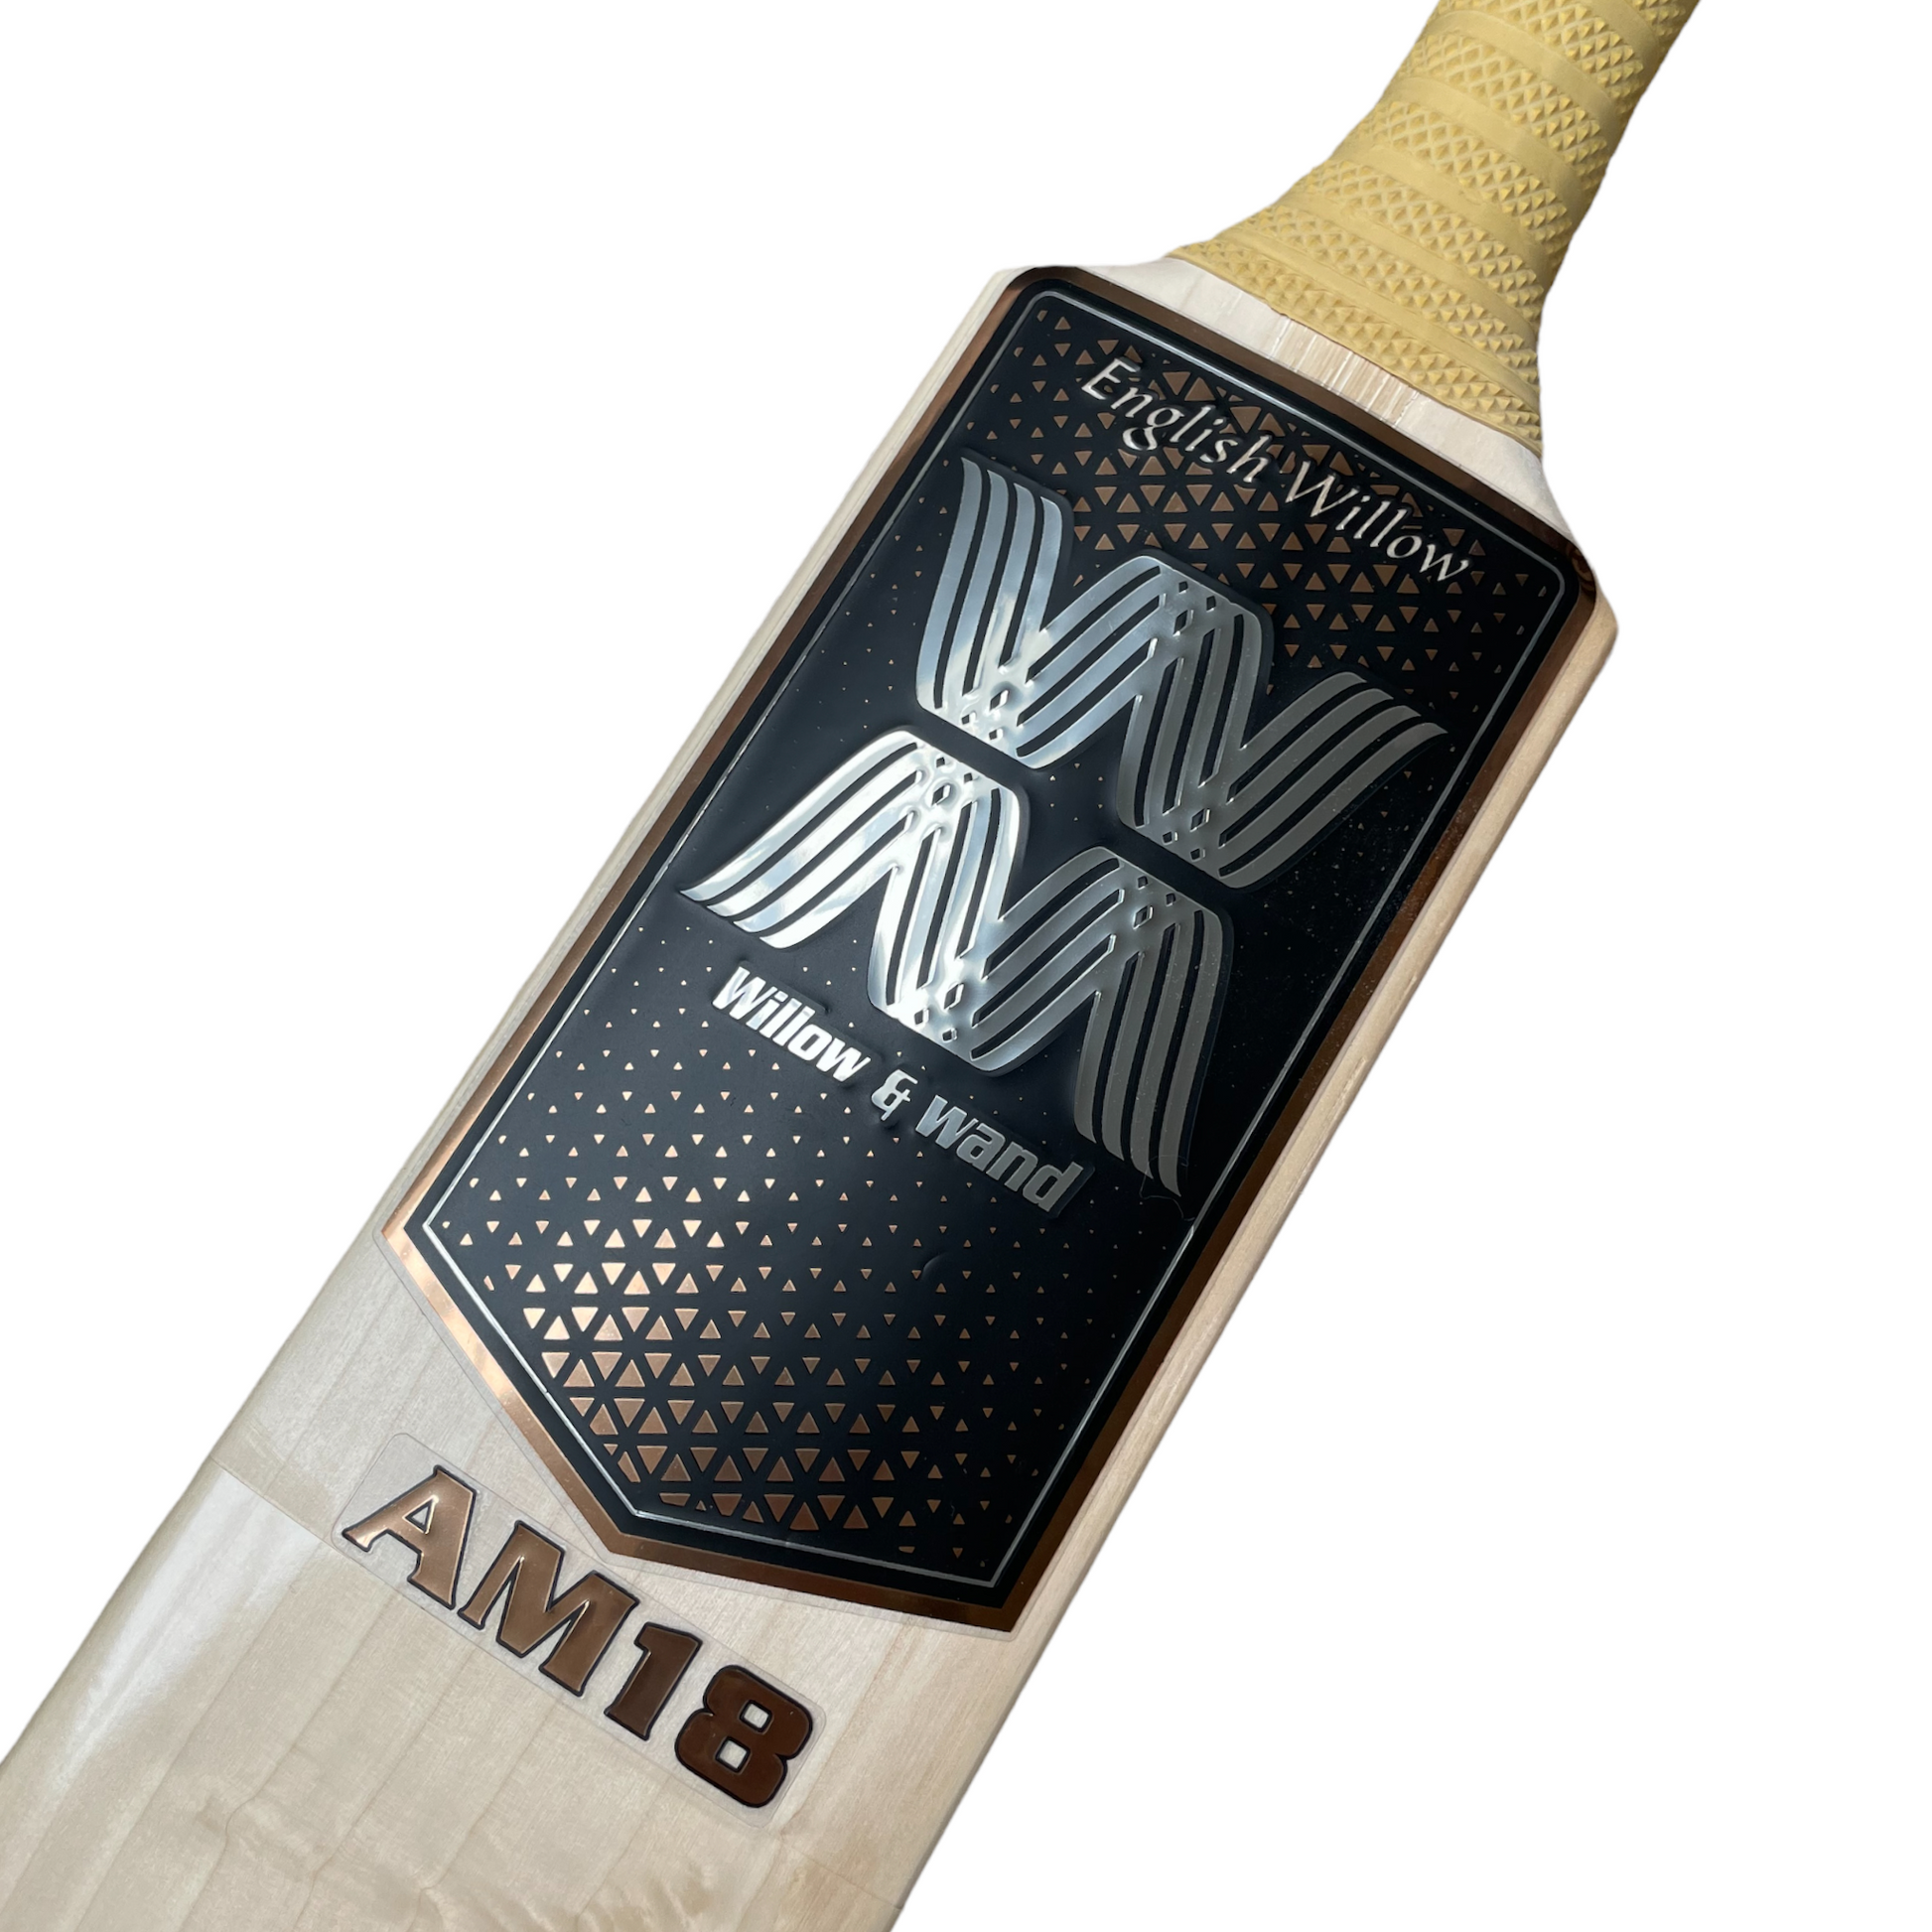 Willow & Wand Grade 1 Cricket bat. Handmade handcrafted english willow. Independent bat makers. Cricket bat showroom and shop in east sussex Brighton and hove.